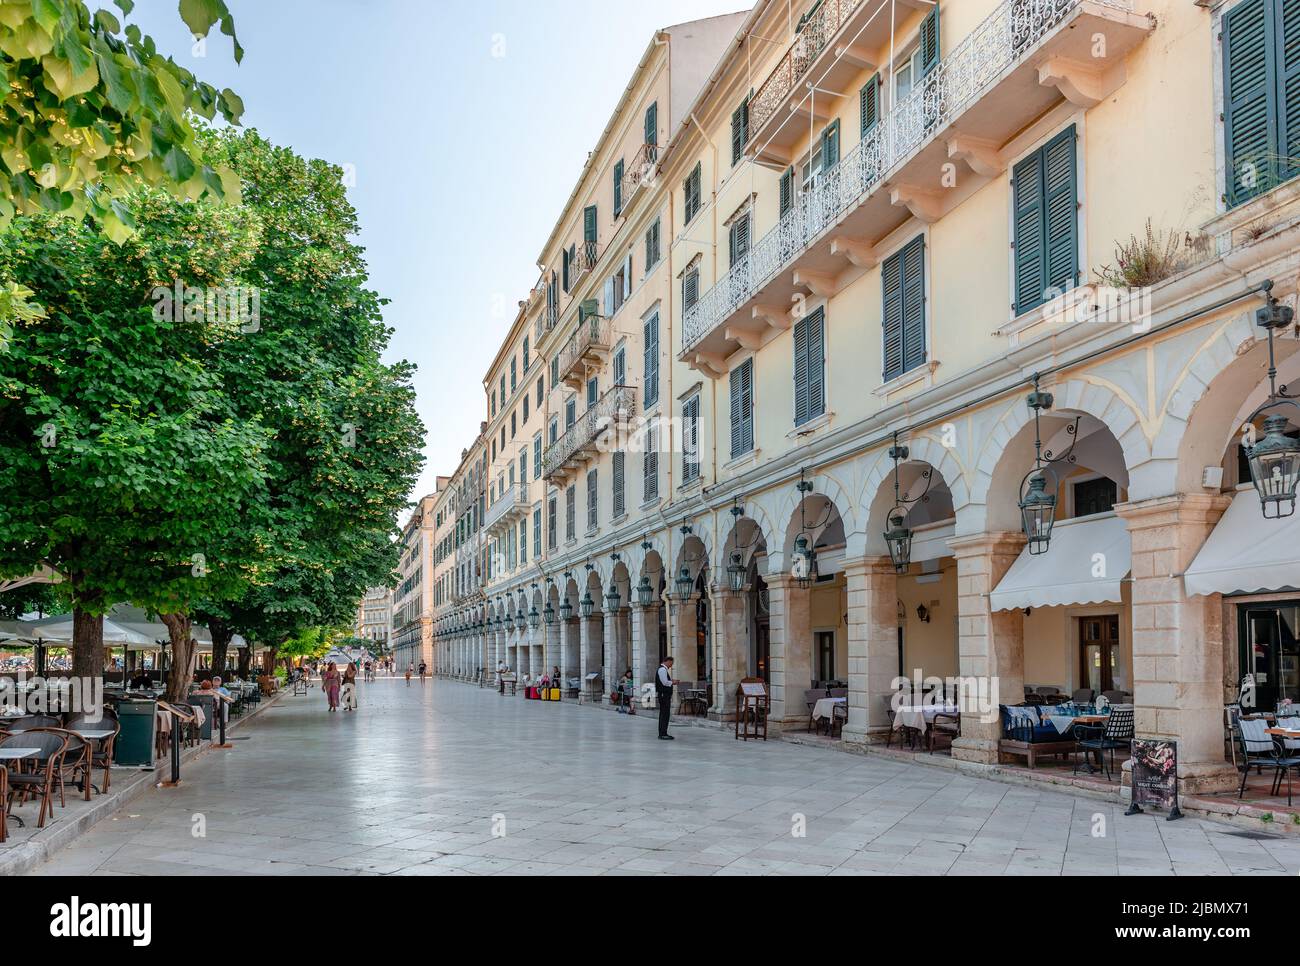 Liston, a pedestrian street with arcaded terraces and fashionable cafes in the western edge of Spianada Square in the center of Corfu Town, Greece. Stock Photo